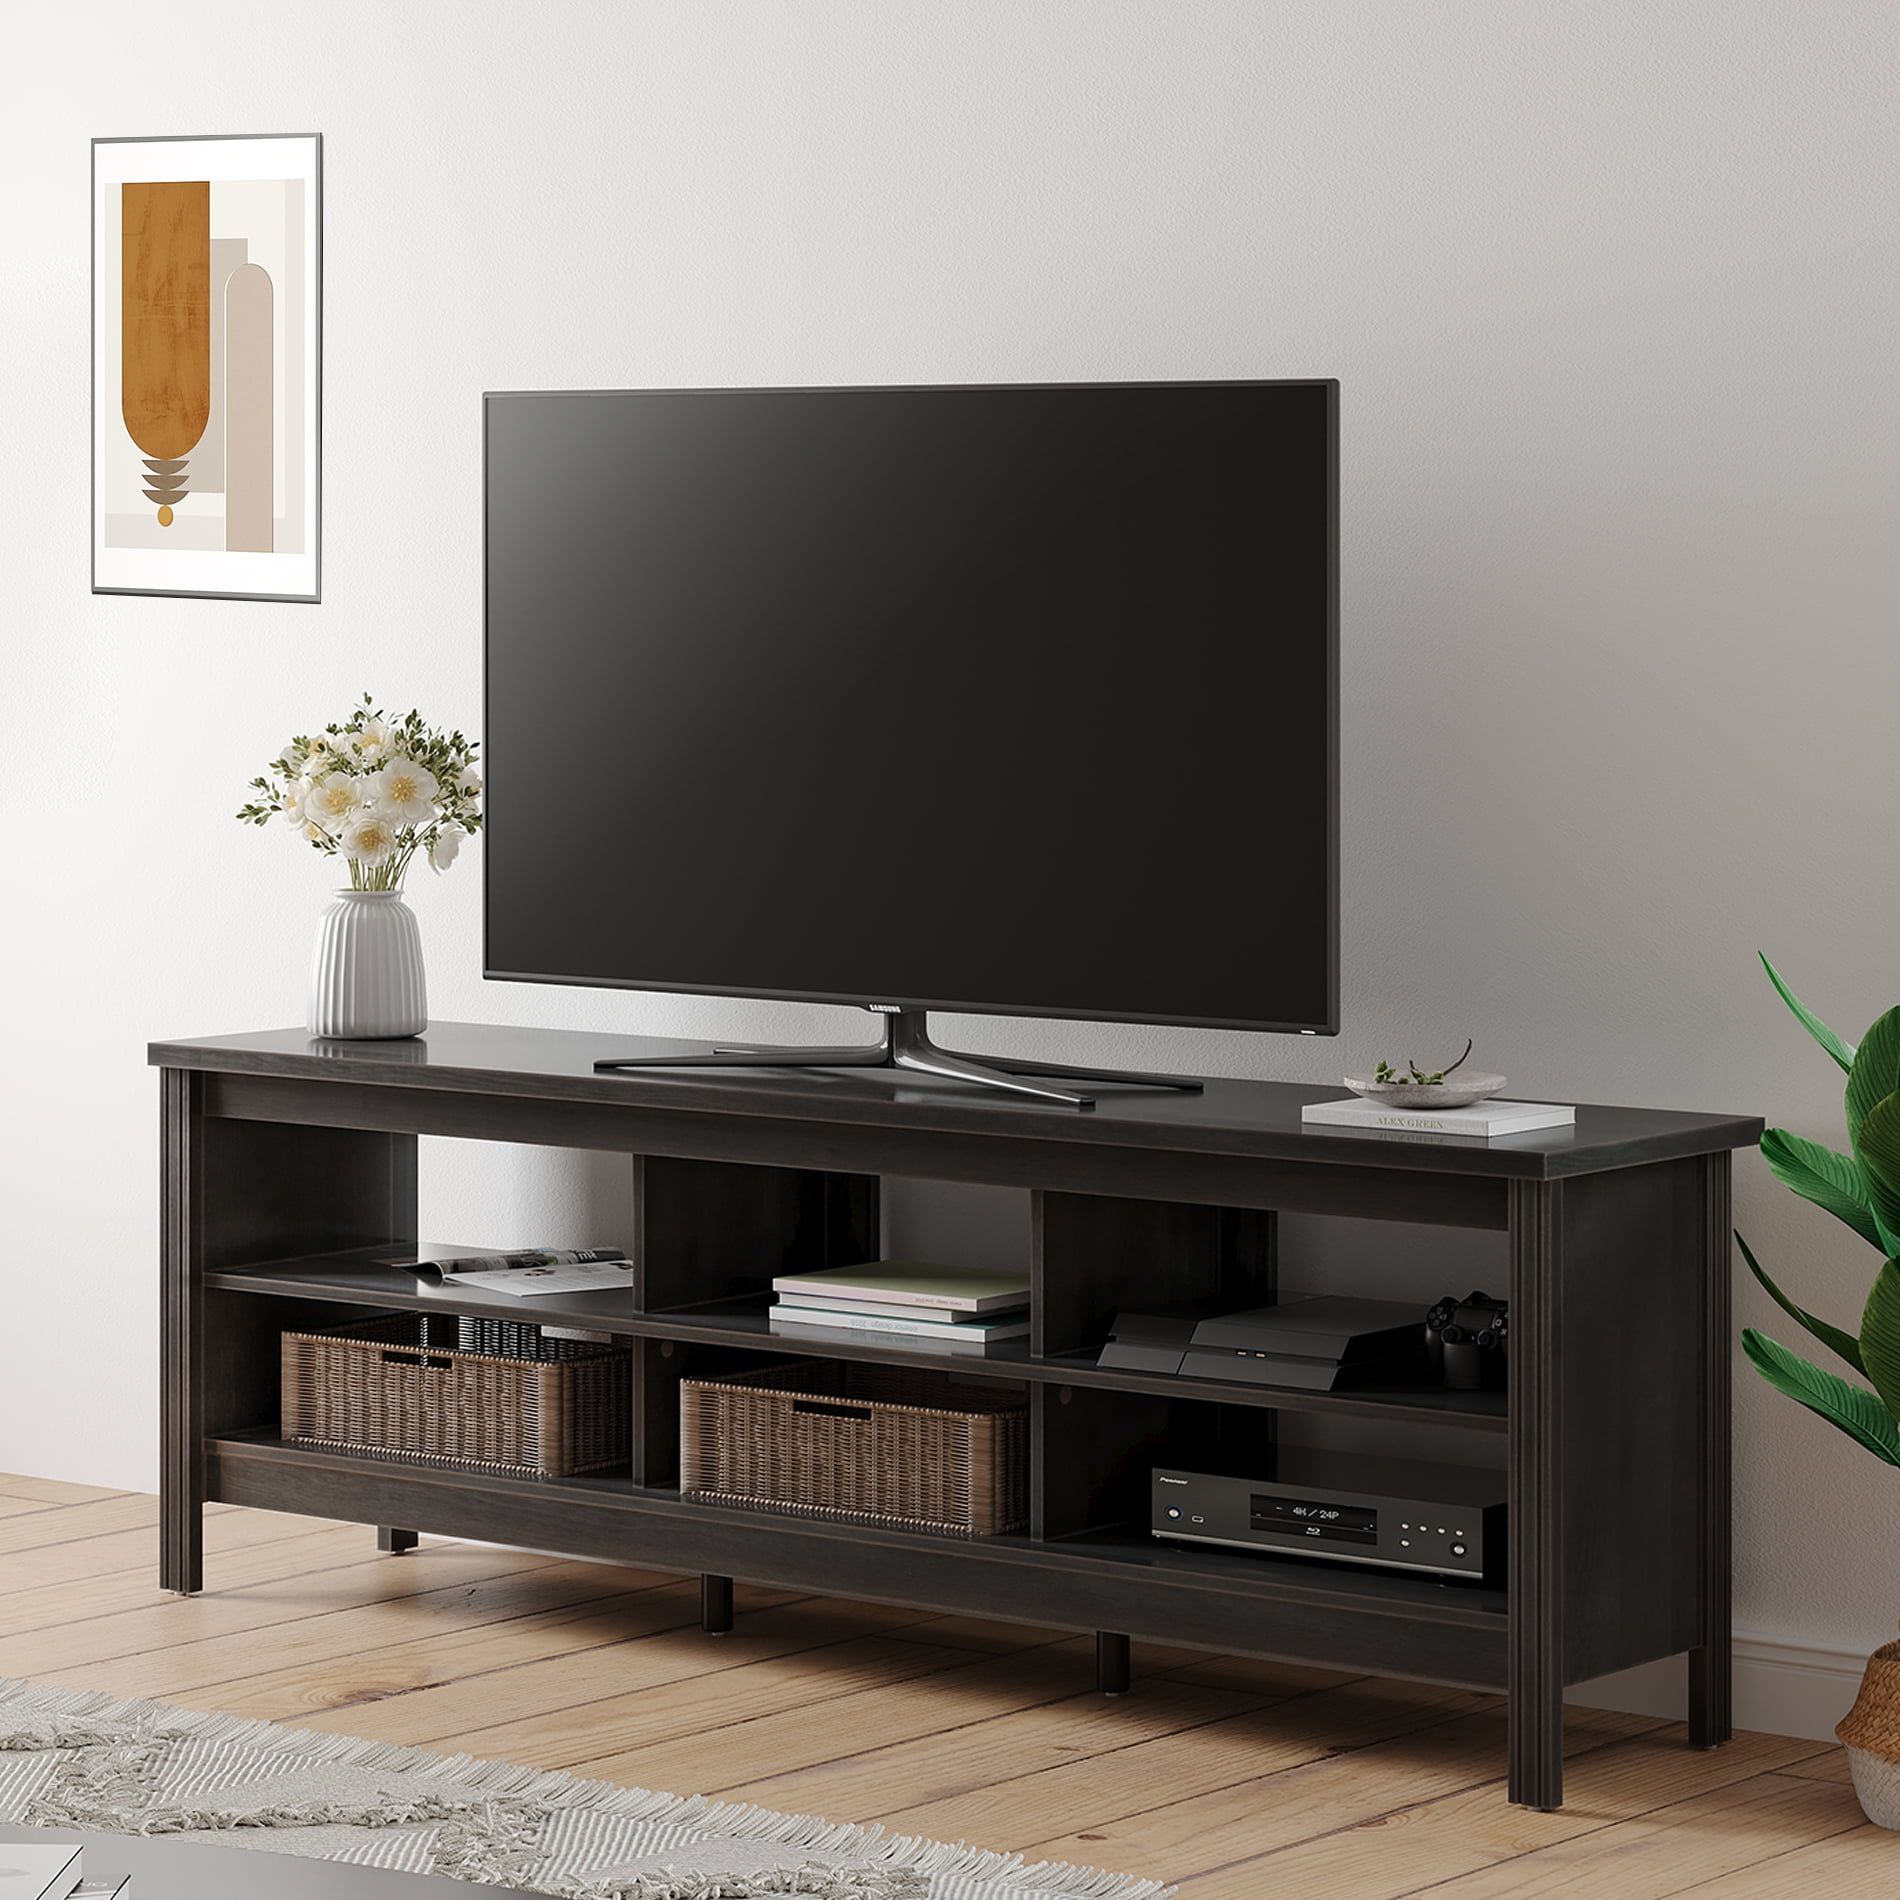 Yuyke Tv Stand For 75 Inch Tv Wood Media Console Cabinet, Tv In Bestier Tv Stand For Tvs Up To 75&quot; (Gallery 12 of 20)